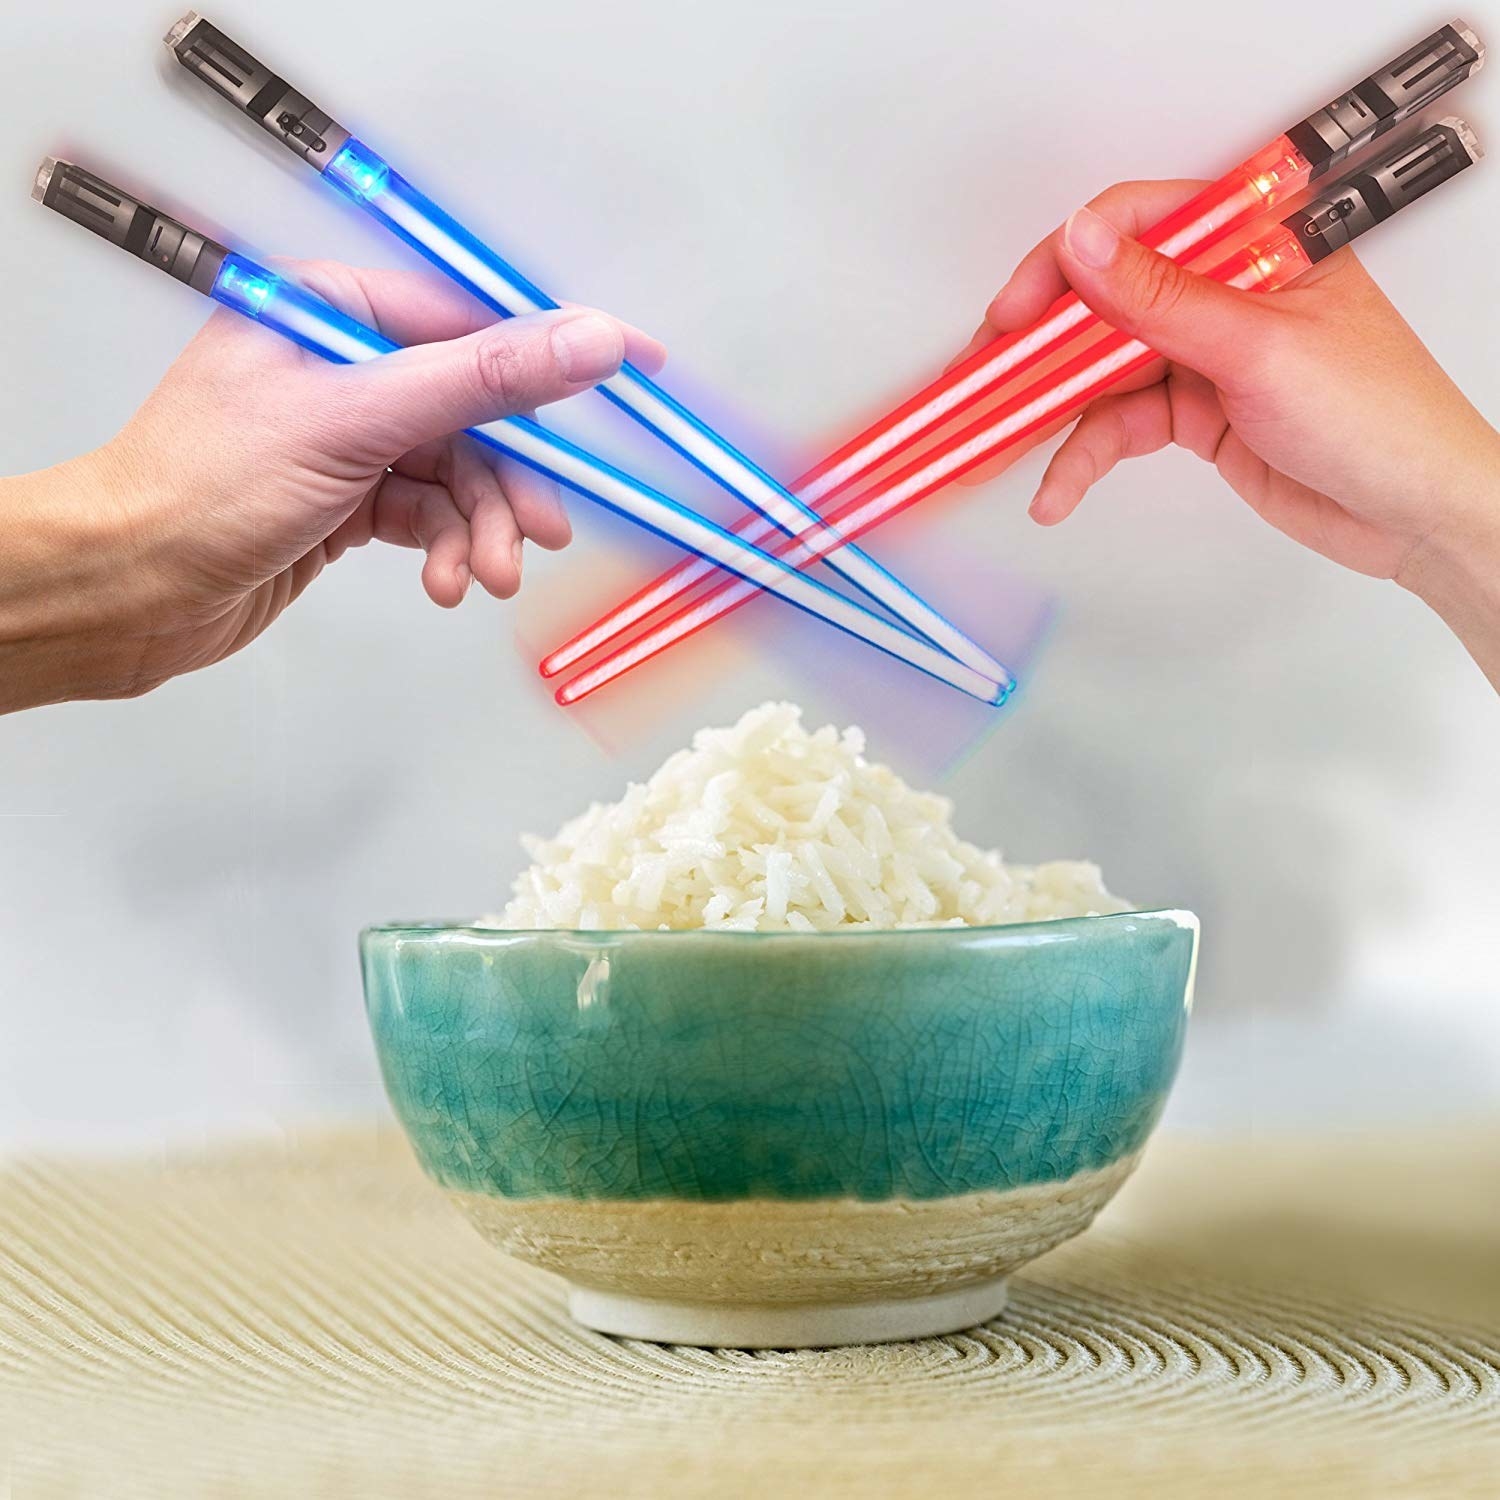 The light-up chopsticks in red and blue